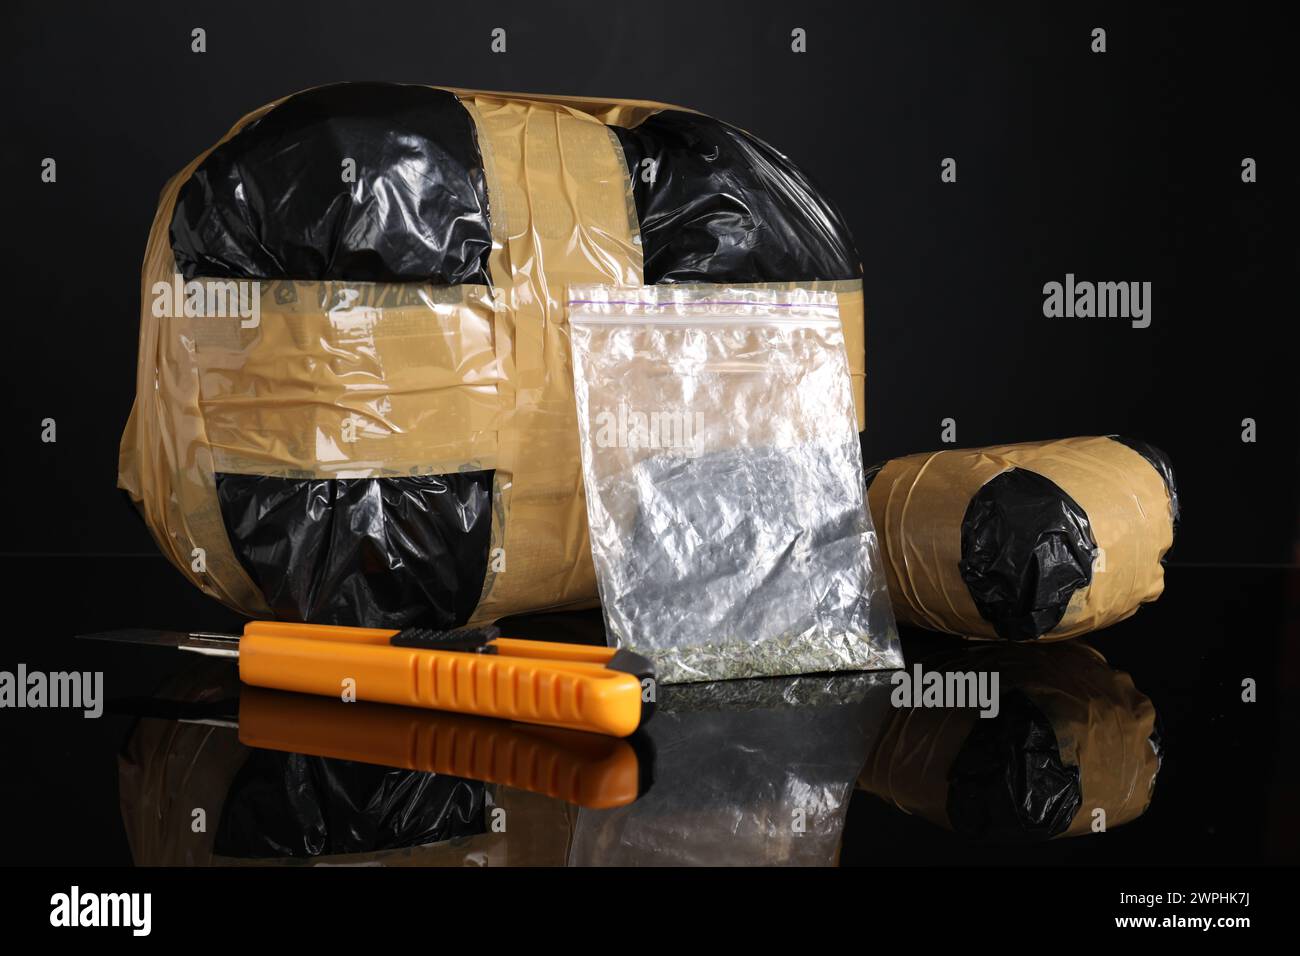 Smuggling, drug trafficking. Packages with narcotics and utility knife on black mirror surface Stock Photo